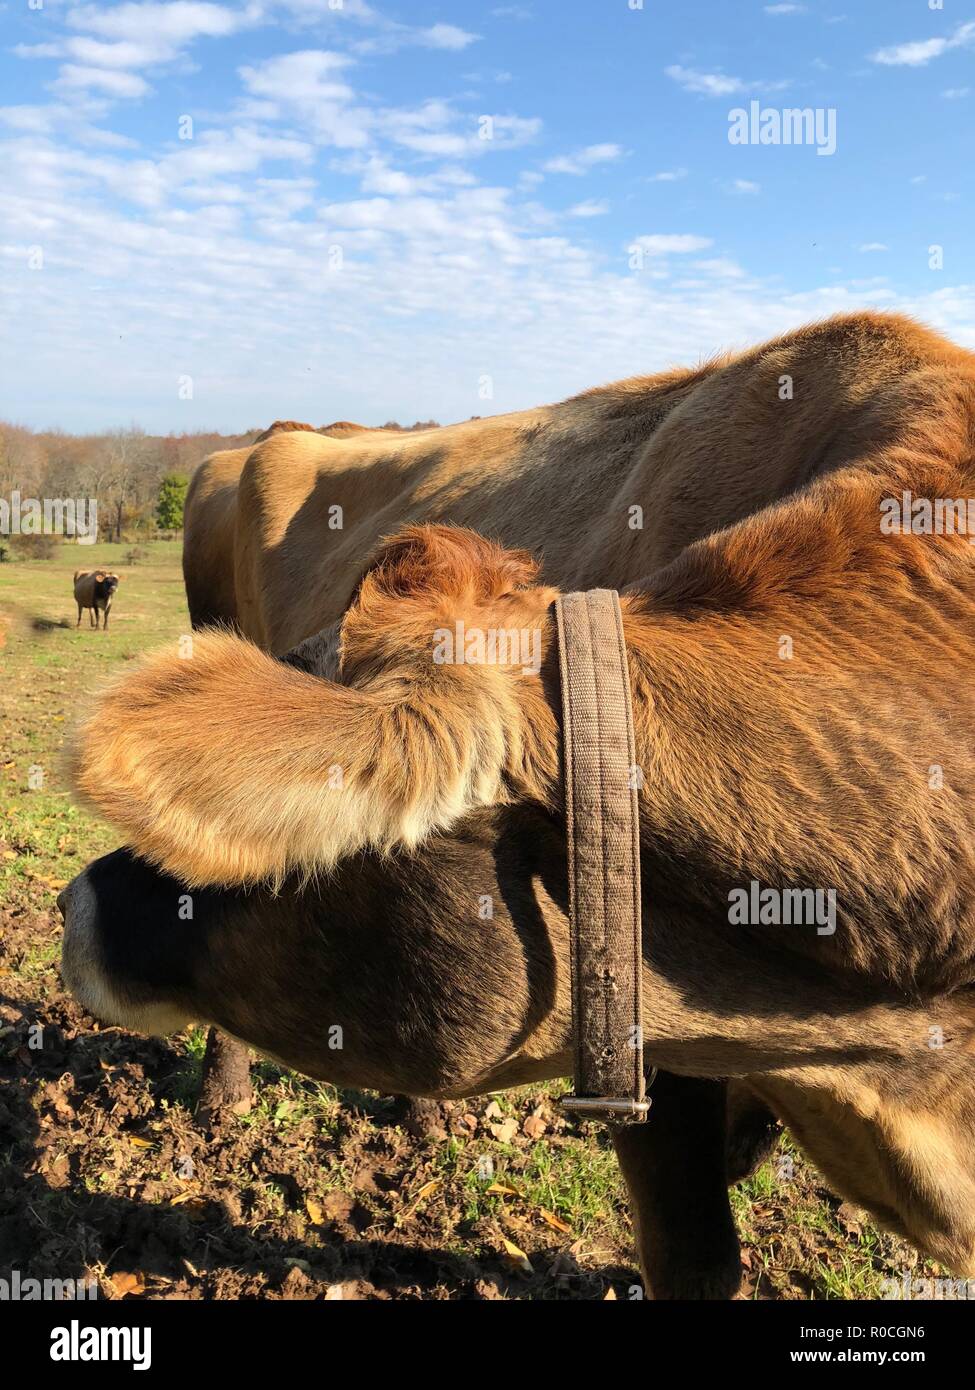 Jersey cow and herd of cows in organic pasture in New England in fall with fall foliage and blue sky Stock Photo